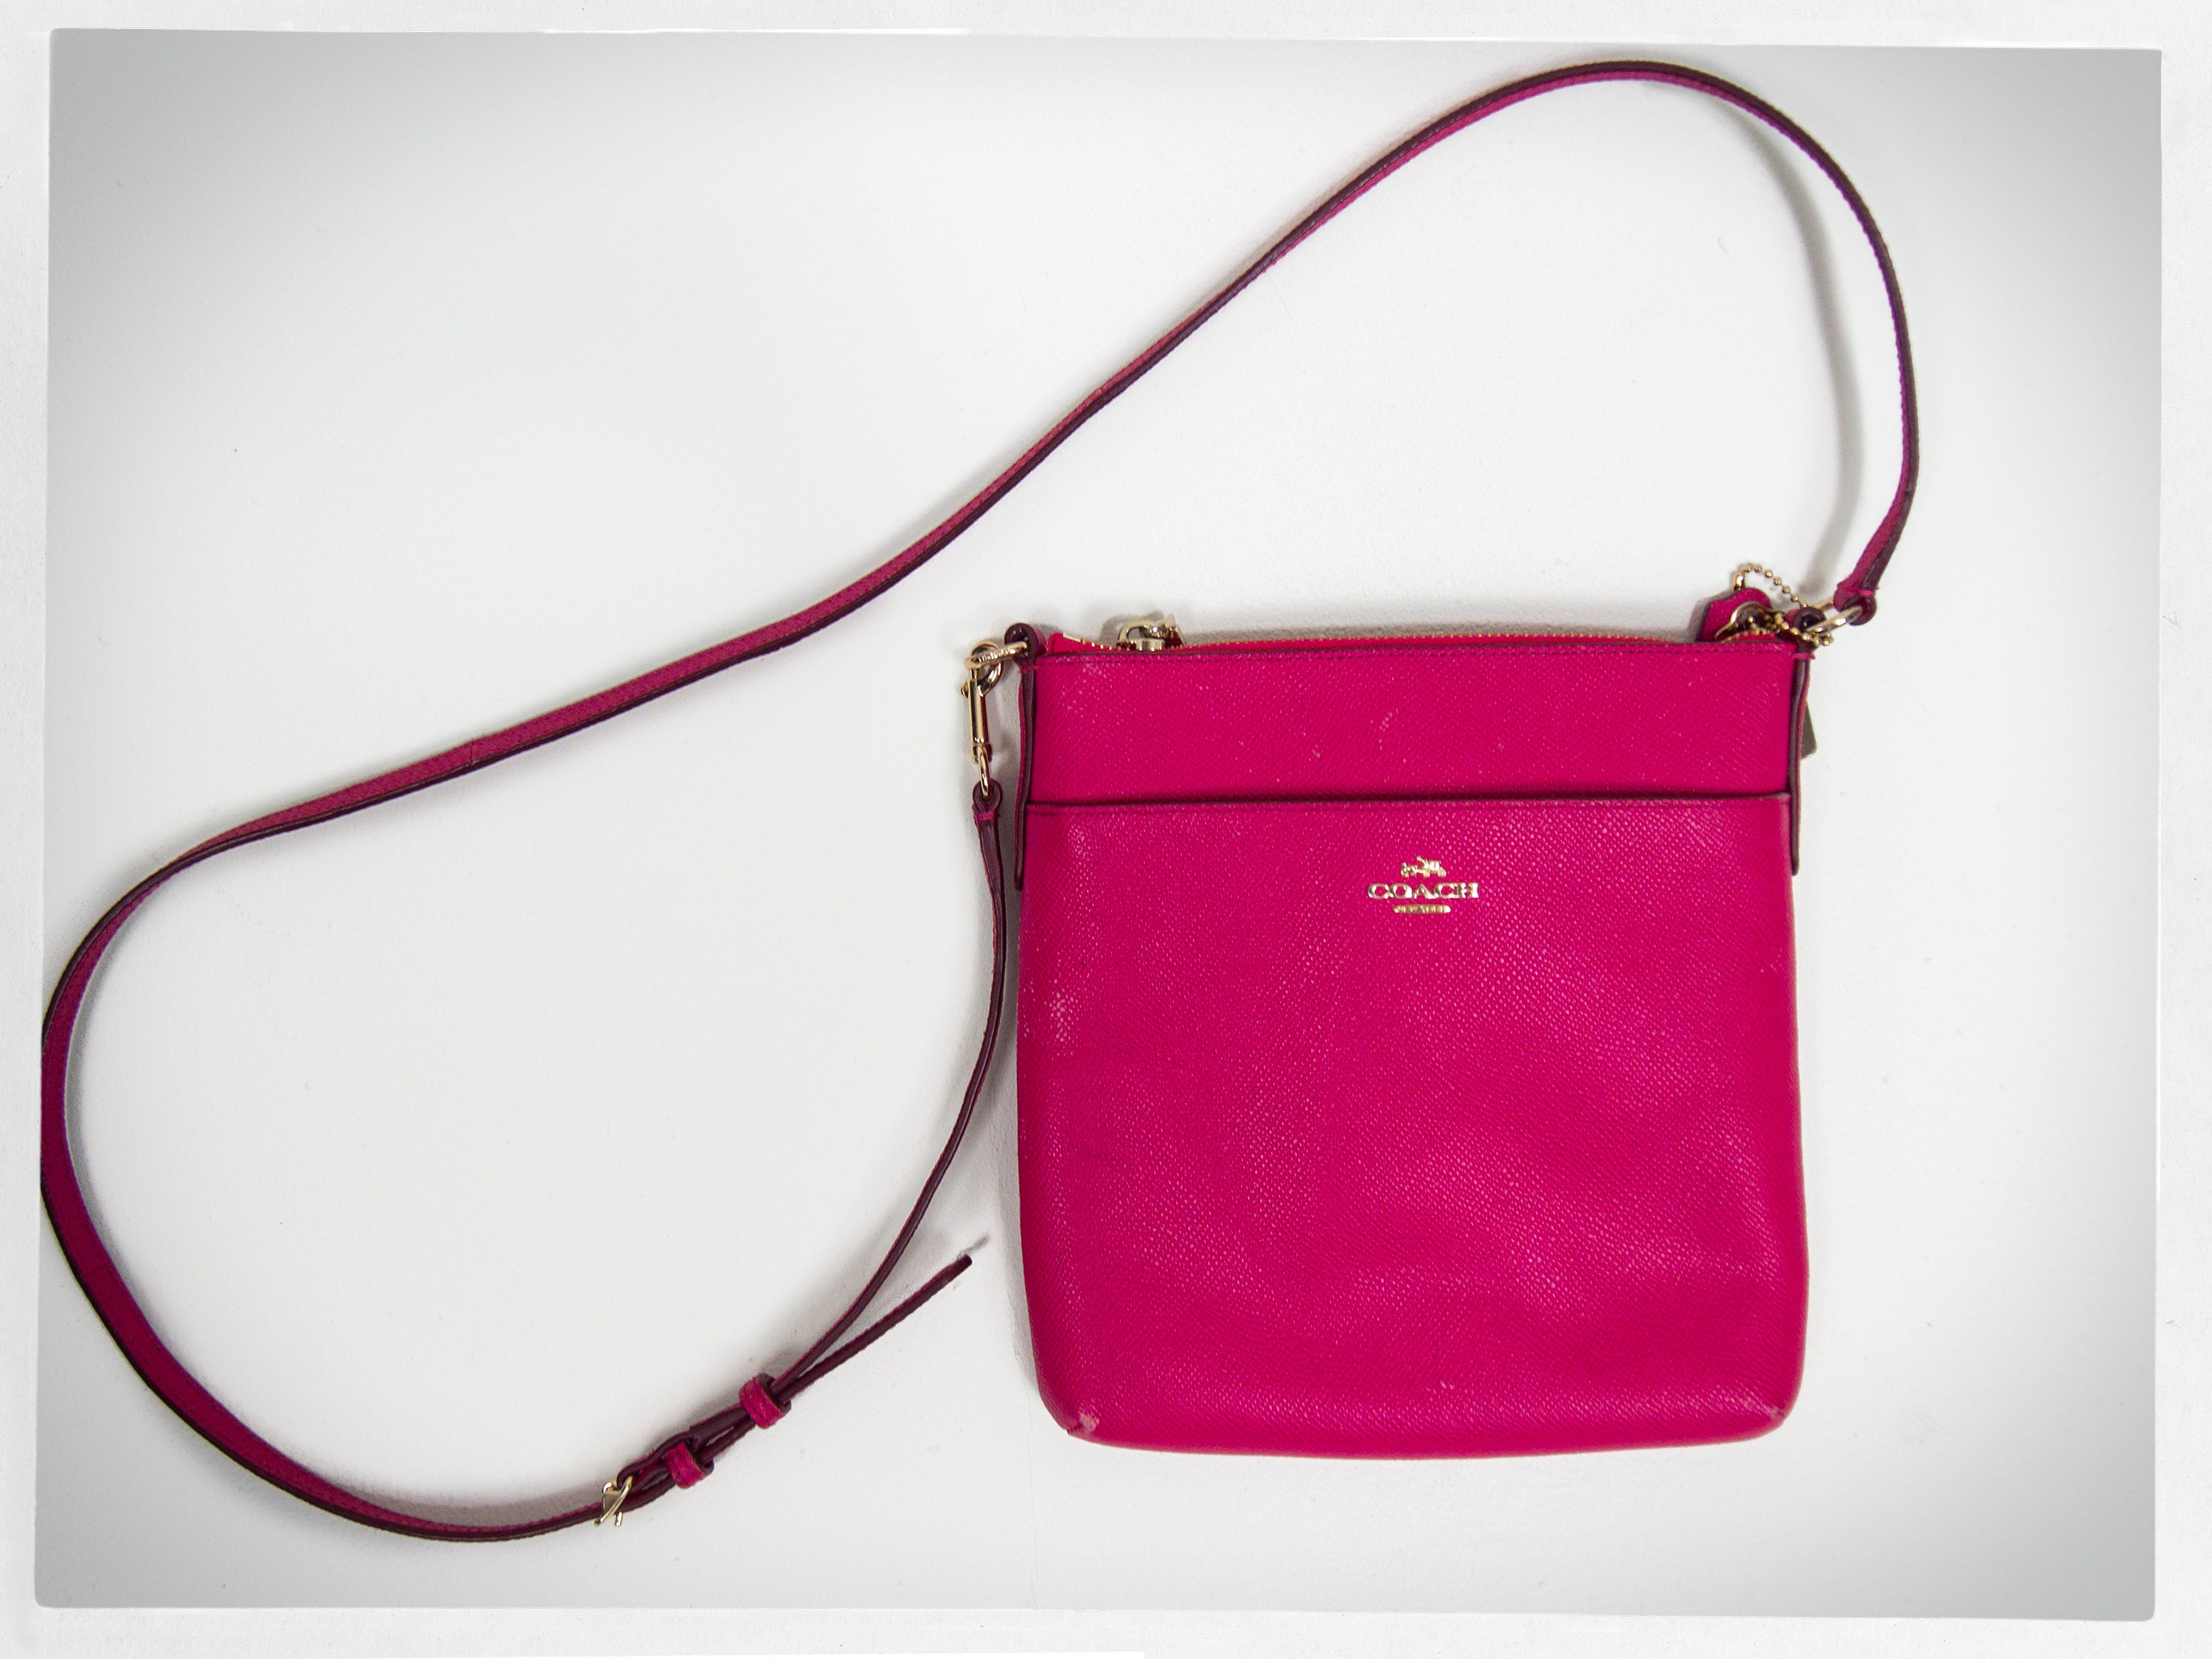 Enter to Win a Stylish Hot Pink Coach Tote